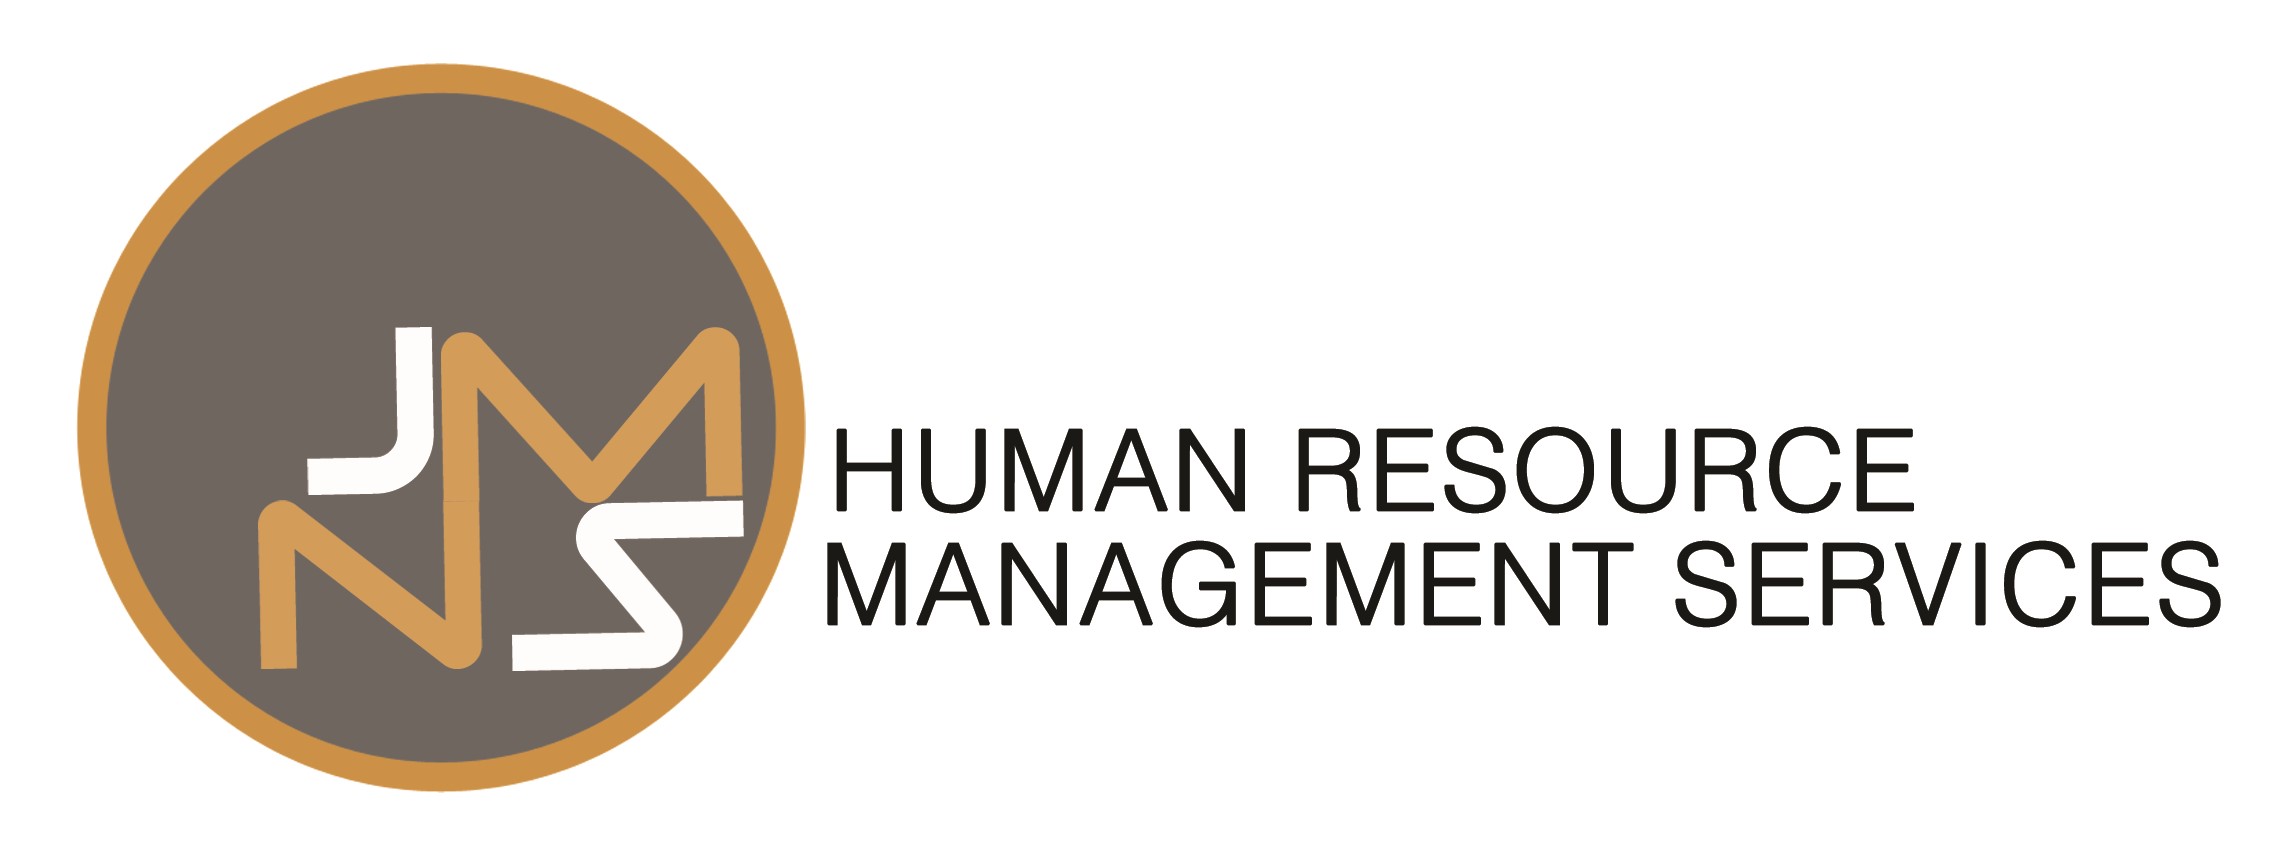 JNMS HUMAN RESOURCE MANAGEMENT SERVICES